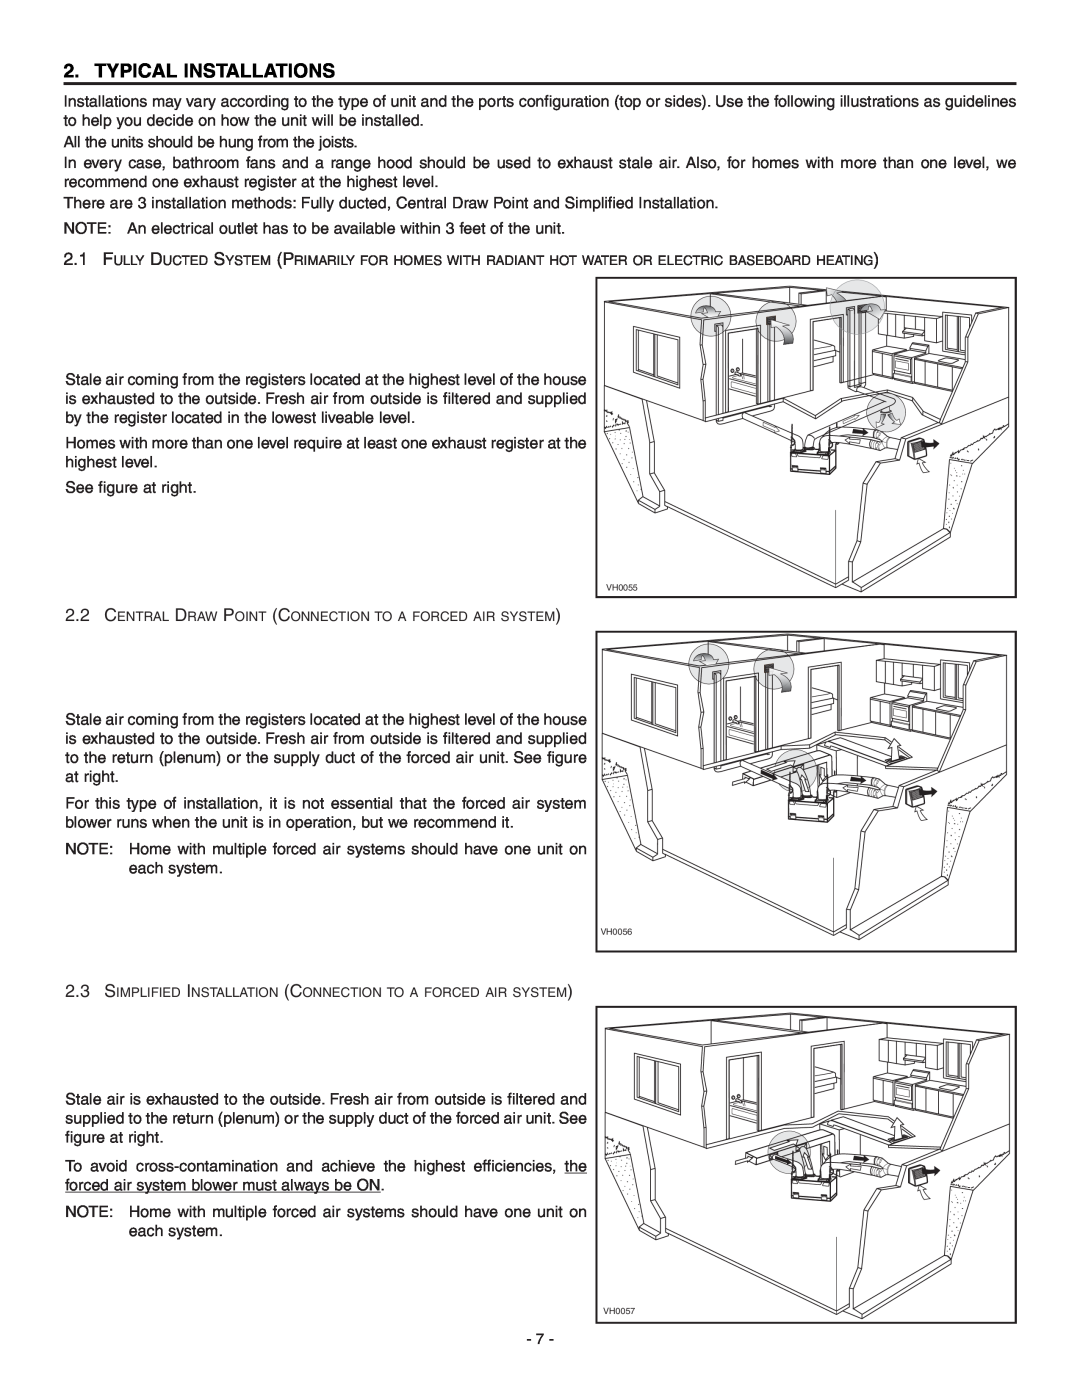 Broan HRV90HT, ERV90HCT installation instructions Typical Installations 